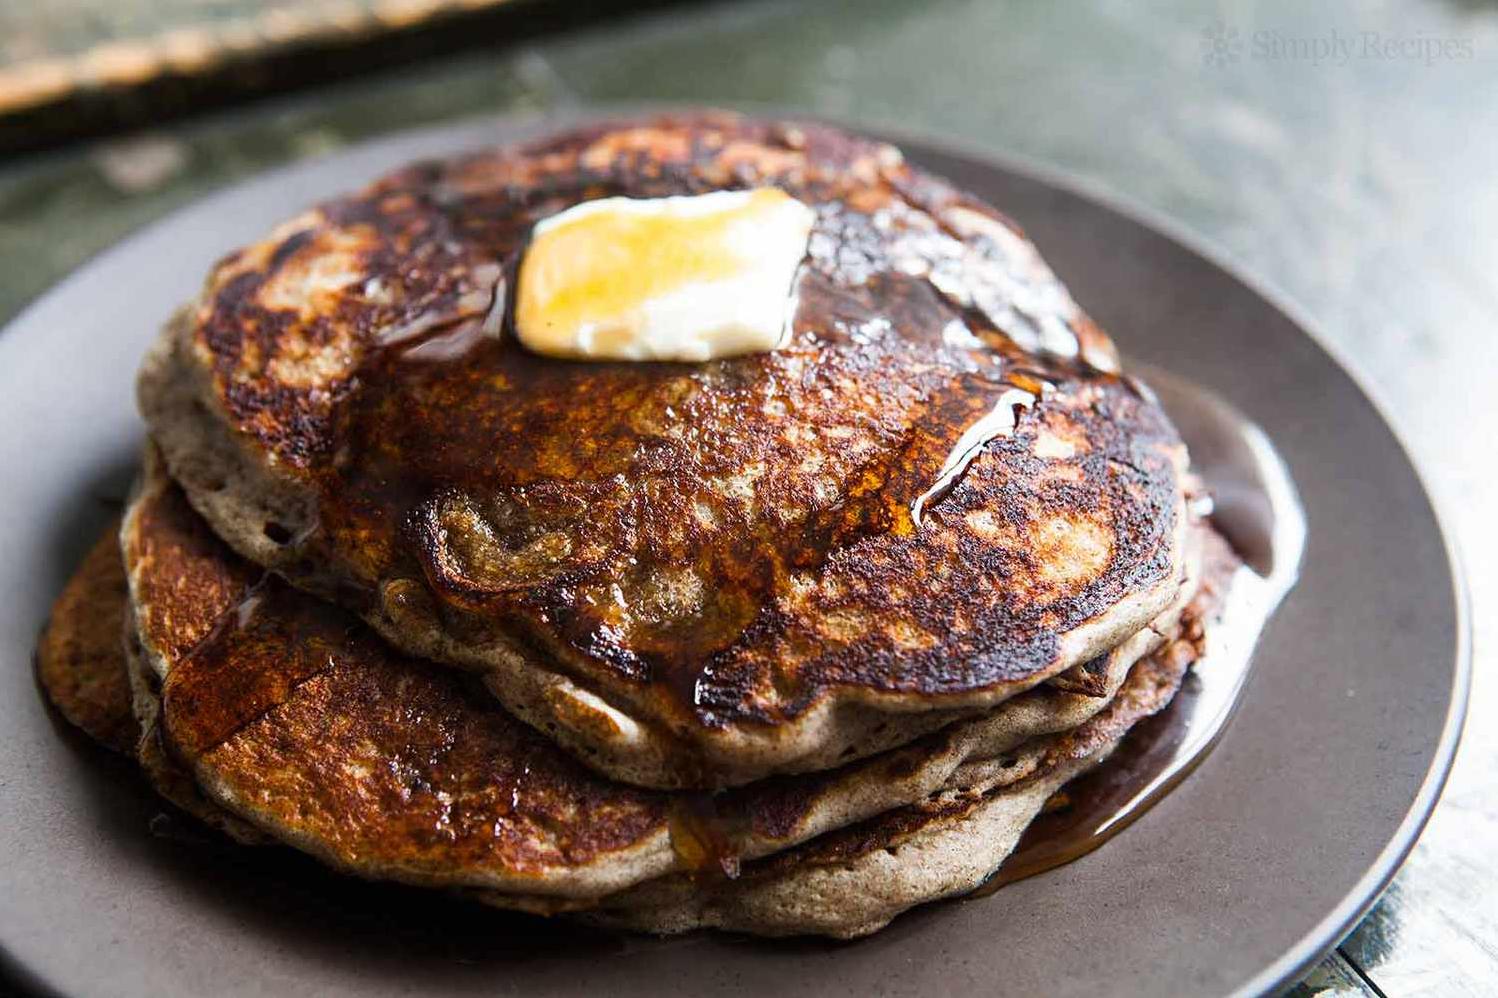  Who says gluten-free pancakes can't be fluffy and delicious?